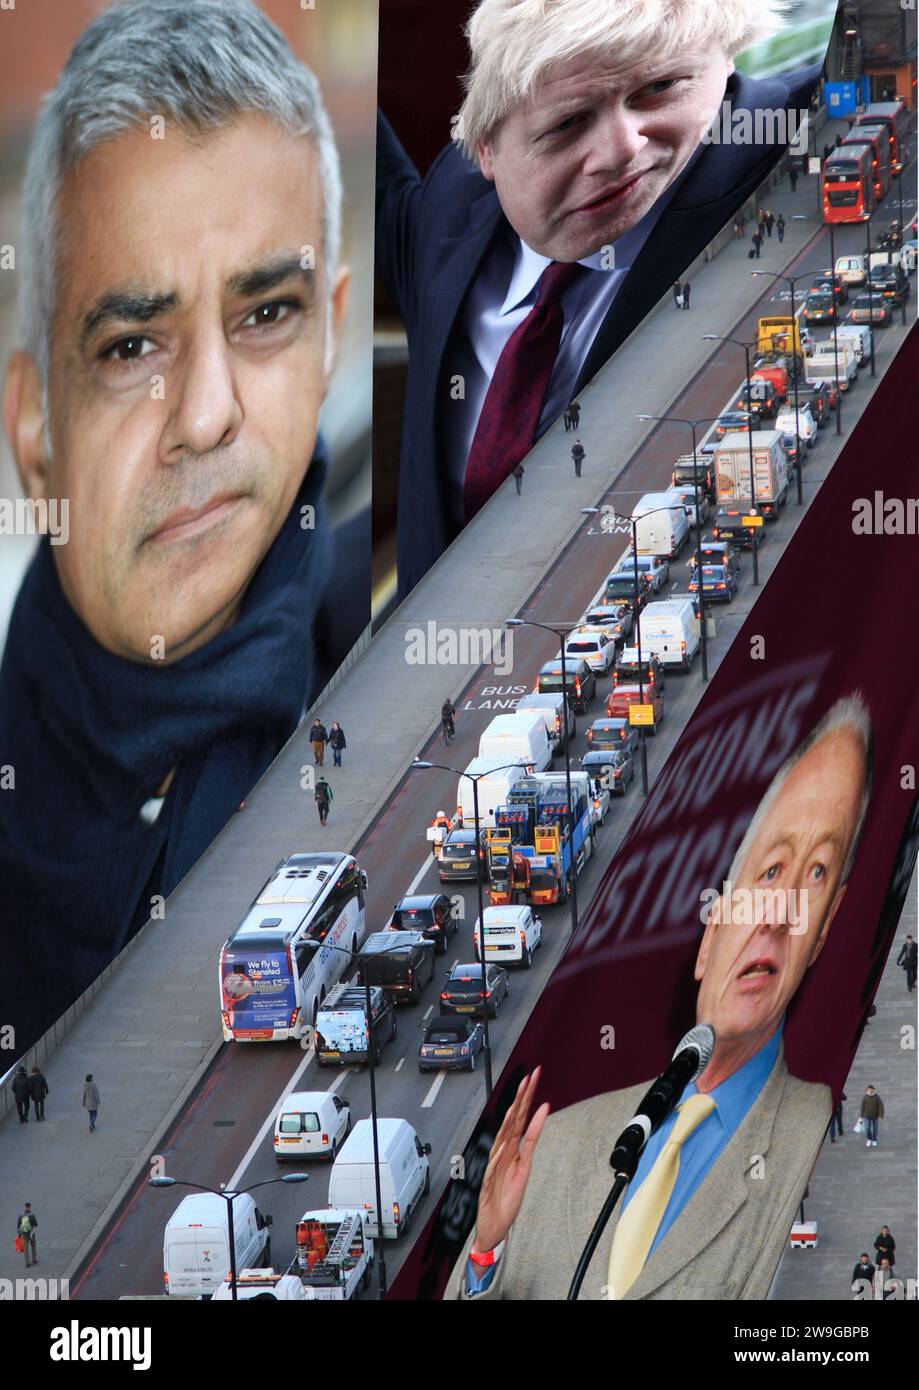 Mayor of London. Sadiq Khan. Boris Johnson. Ken Livingstone. London traffic. Transport for London. Congestion charge. Low emission zone. Ultra low emission zone. Cycle lanes. Bus lane. Motorcycles. Private cars. Buses. Taxis. Private hire cars. Mini cabs. Commercial vehicles. London bridge. Aerial view. Politicians. Famous politicians. Drivers. Driving. Work. Stock Photo